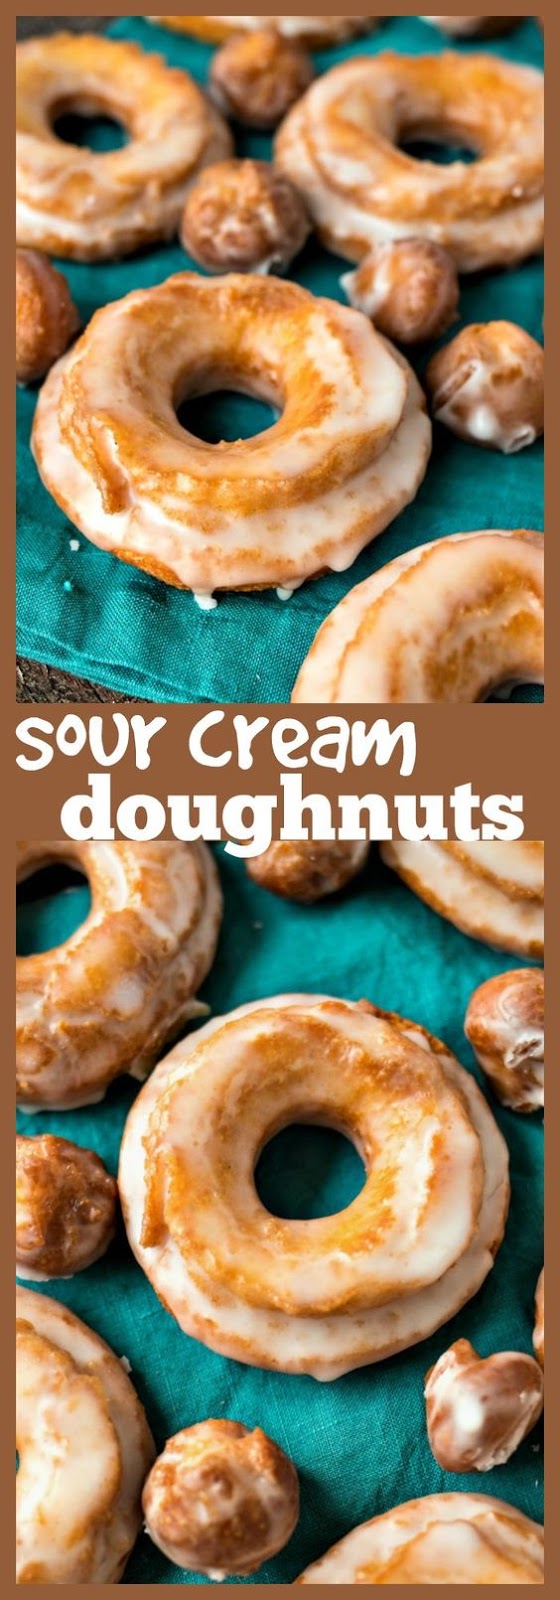 Sour Cream Doughnuts – Dense and crispy on the outside, moist and cakey on the inside, these sour cream doughnuts are your favorite cake doughnuts that are ready in half the time as yeast doughnuts! #recipe #doughnuts #donuts #dessert #breakfast #brunch